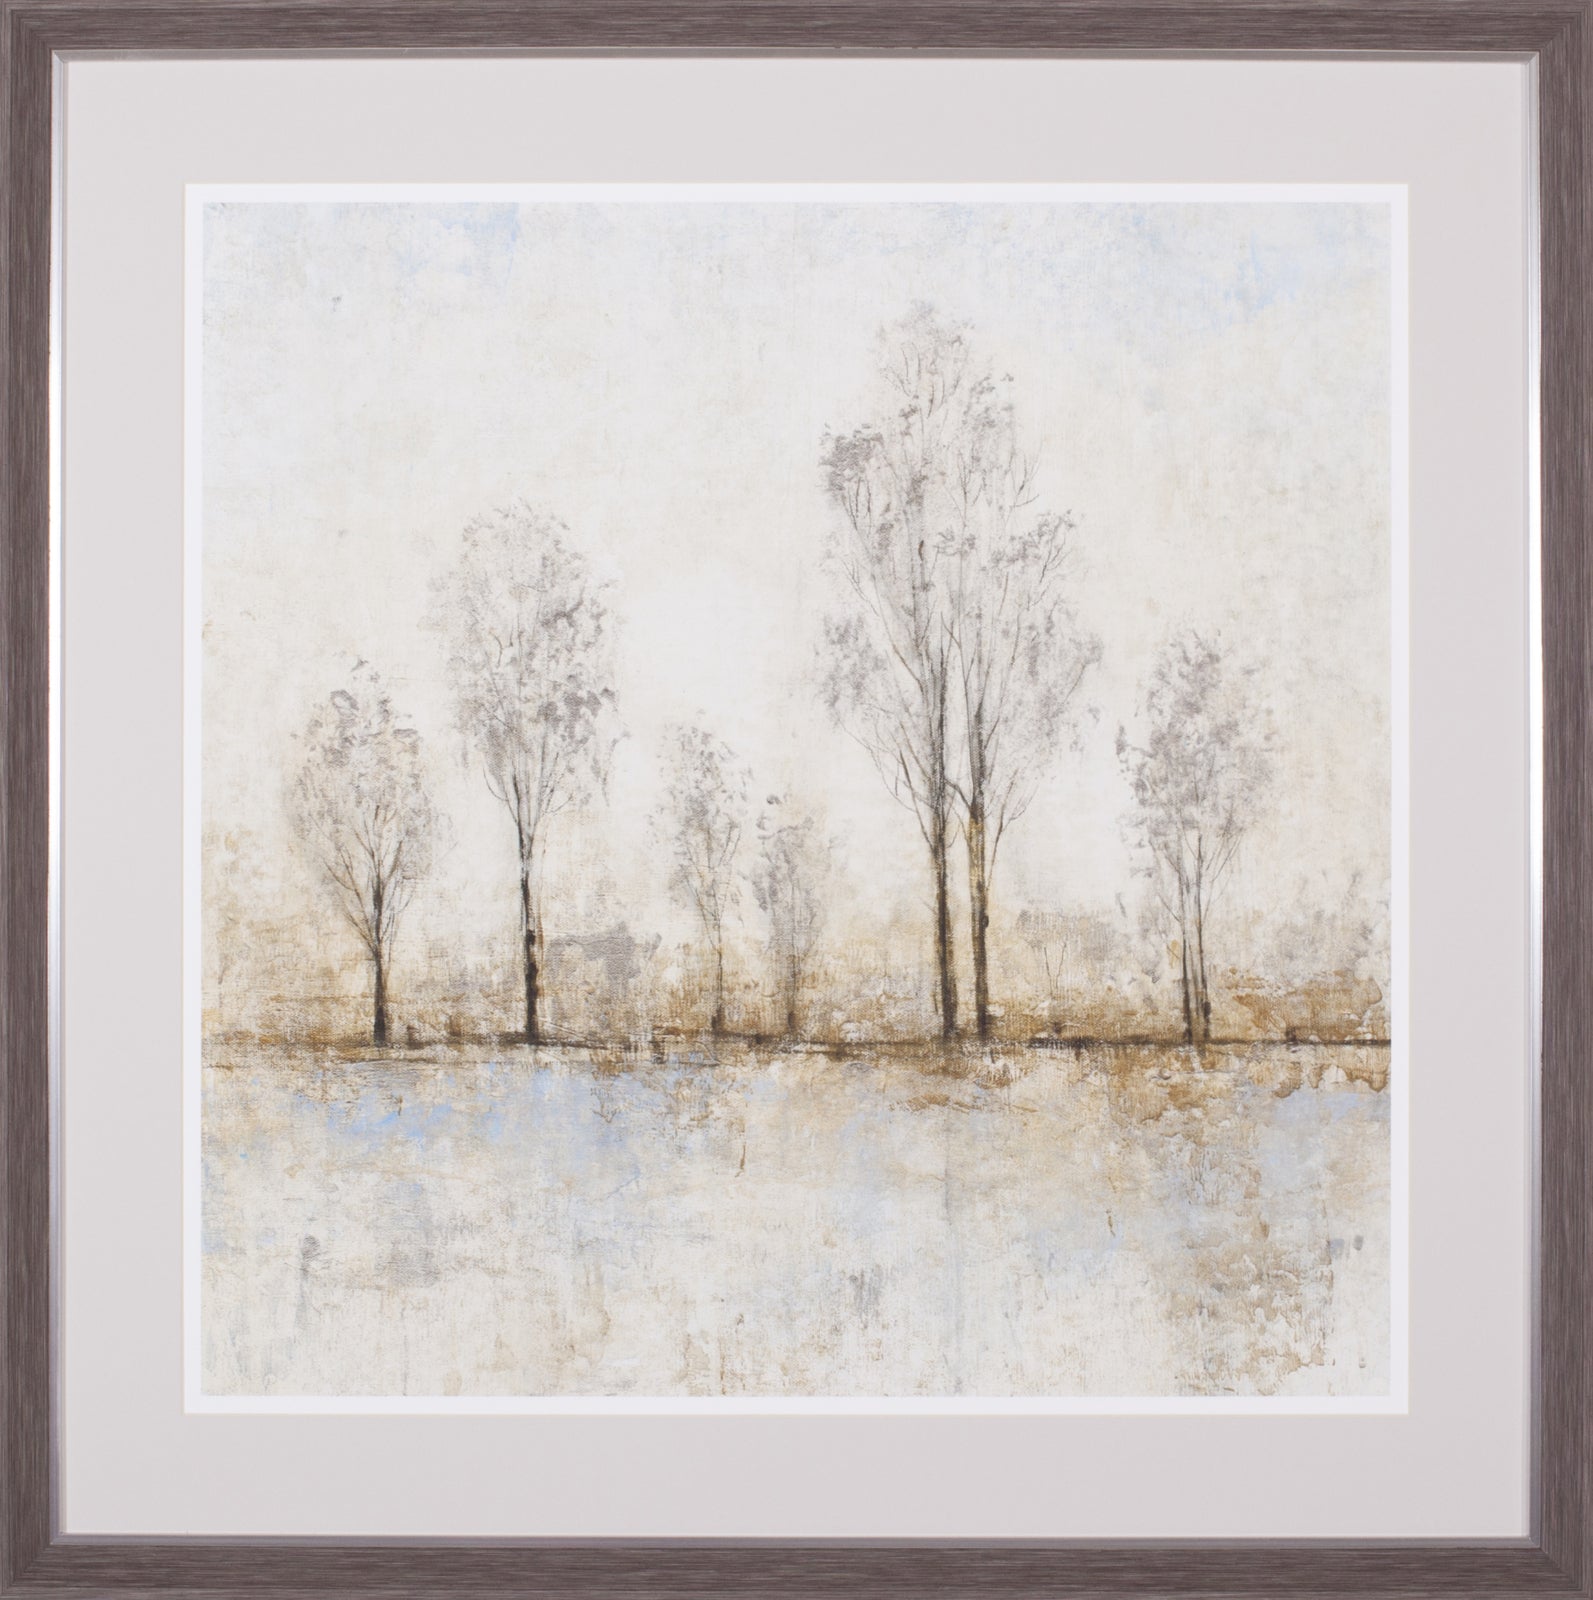 Art Effects Quiet Nature III Wall Art by Tim O'Toole